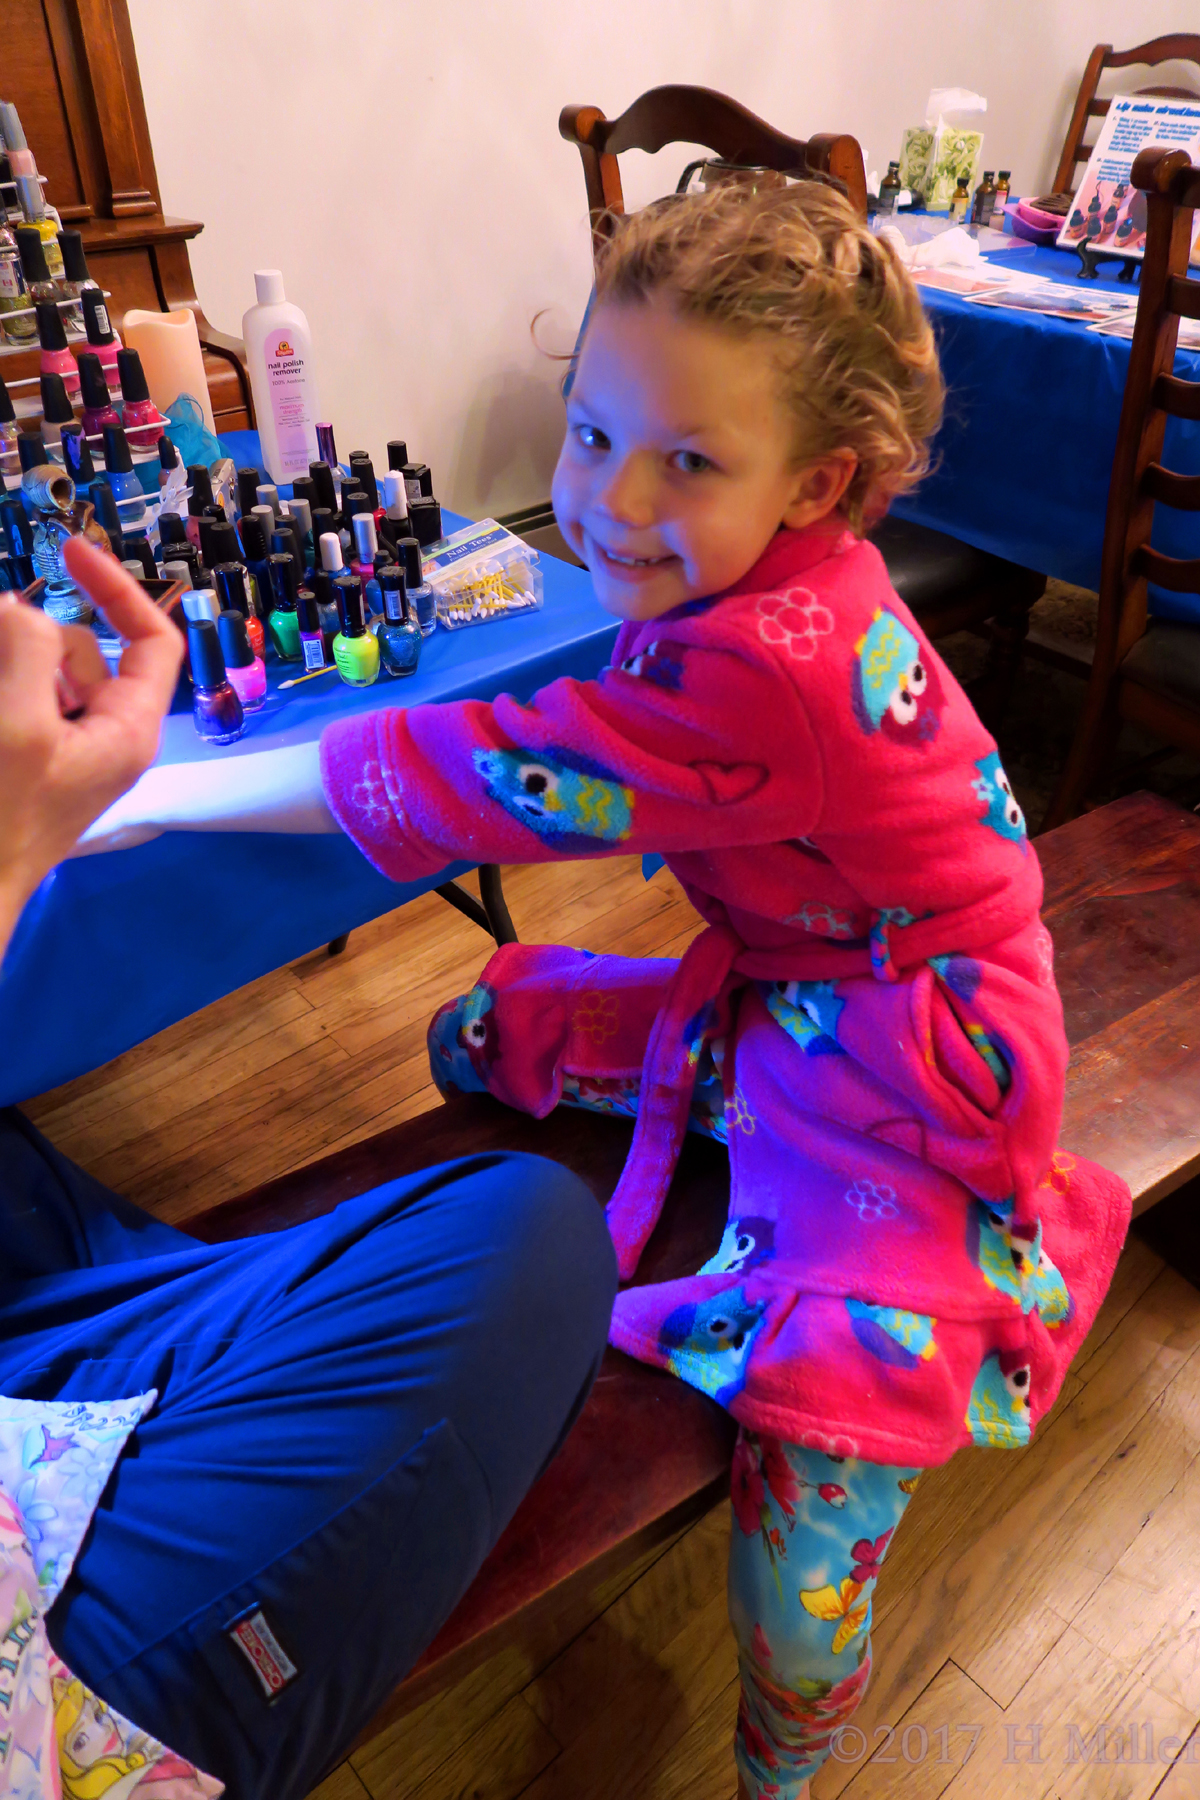 Getting Her Mini Manicure Done At The Spa For Girls! 